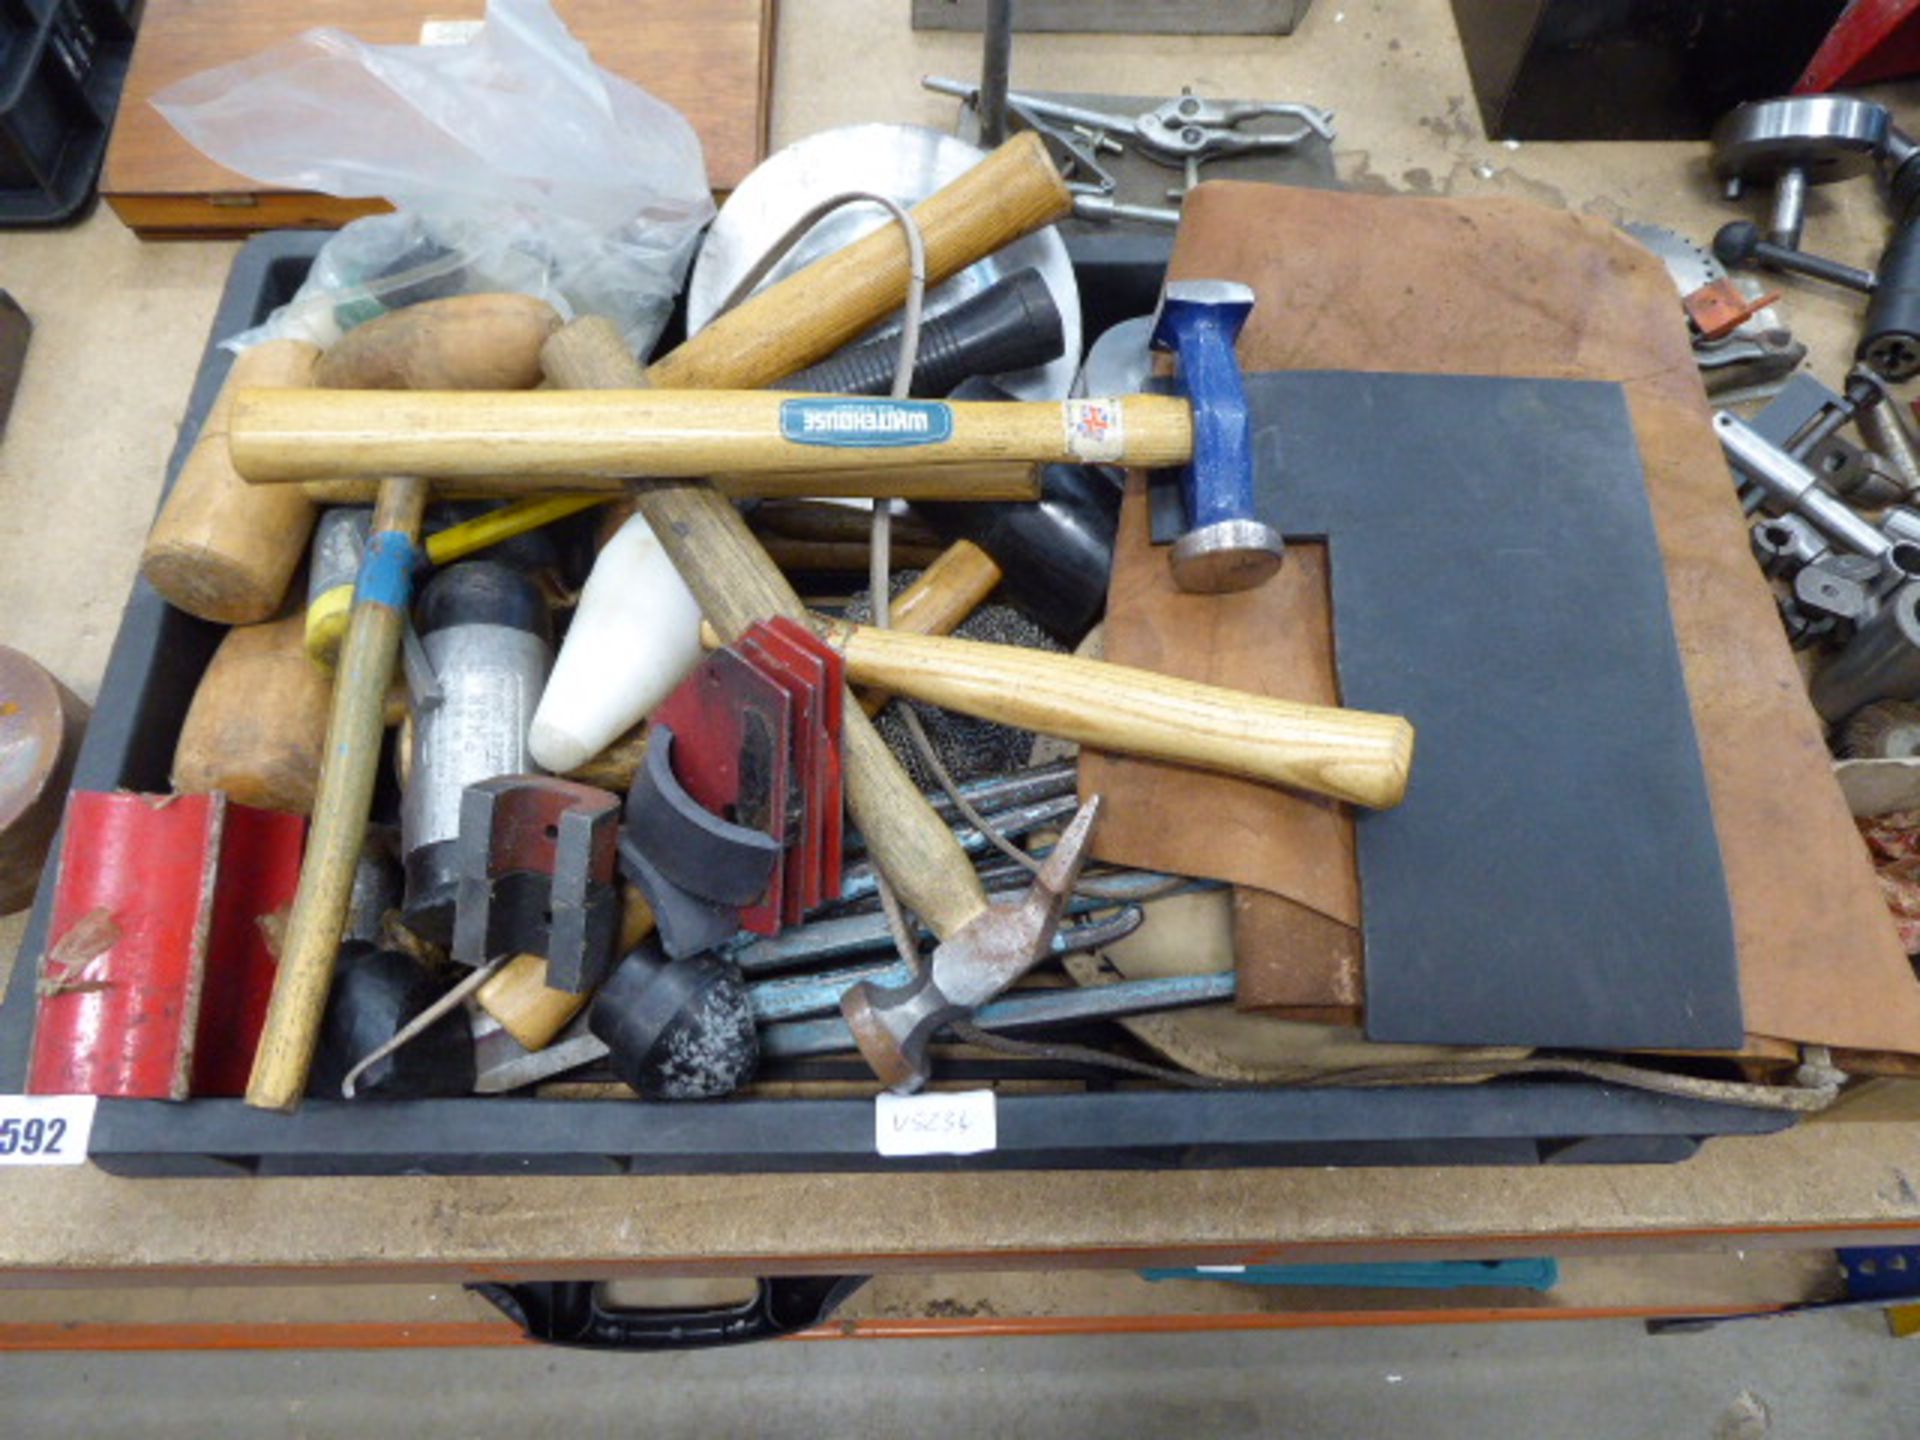 A range of metalworkers hammers, mallets and accessories